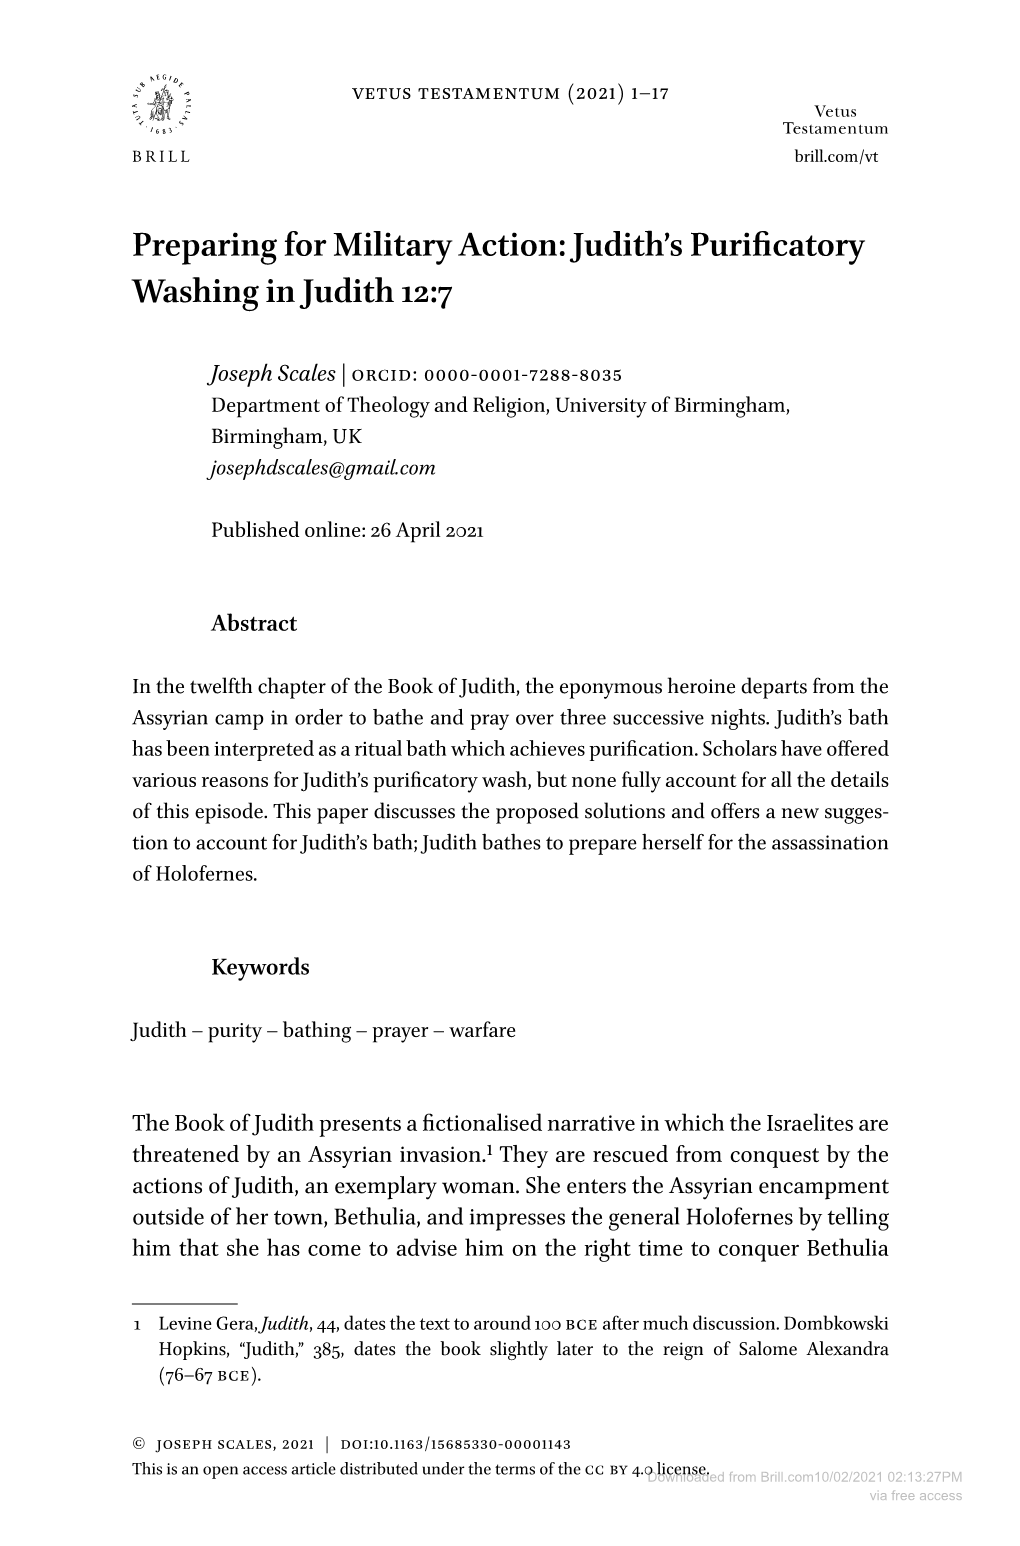 Preparing for Military Action: Judith's Purificatory Washing in Judith 12:7